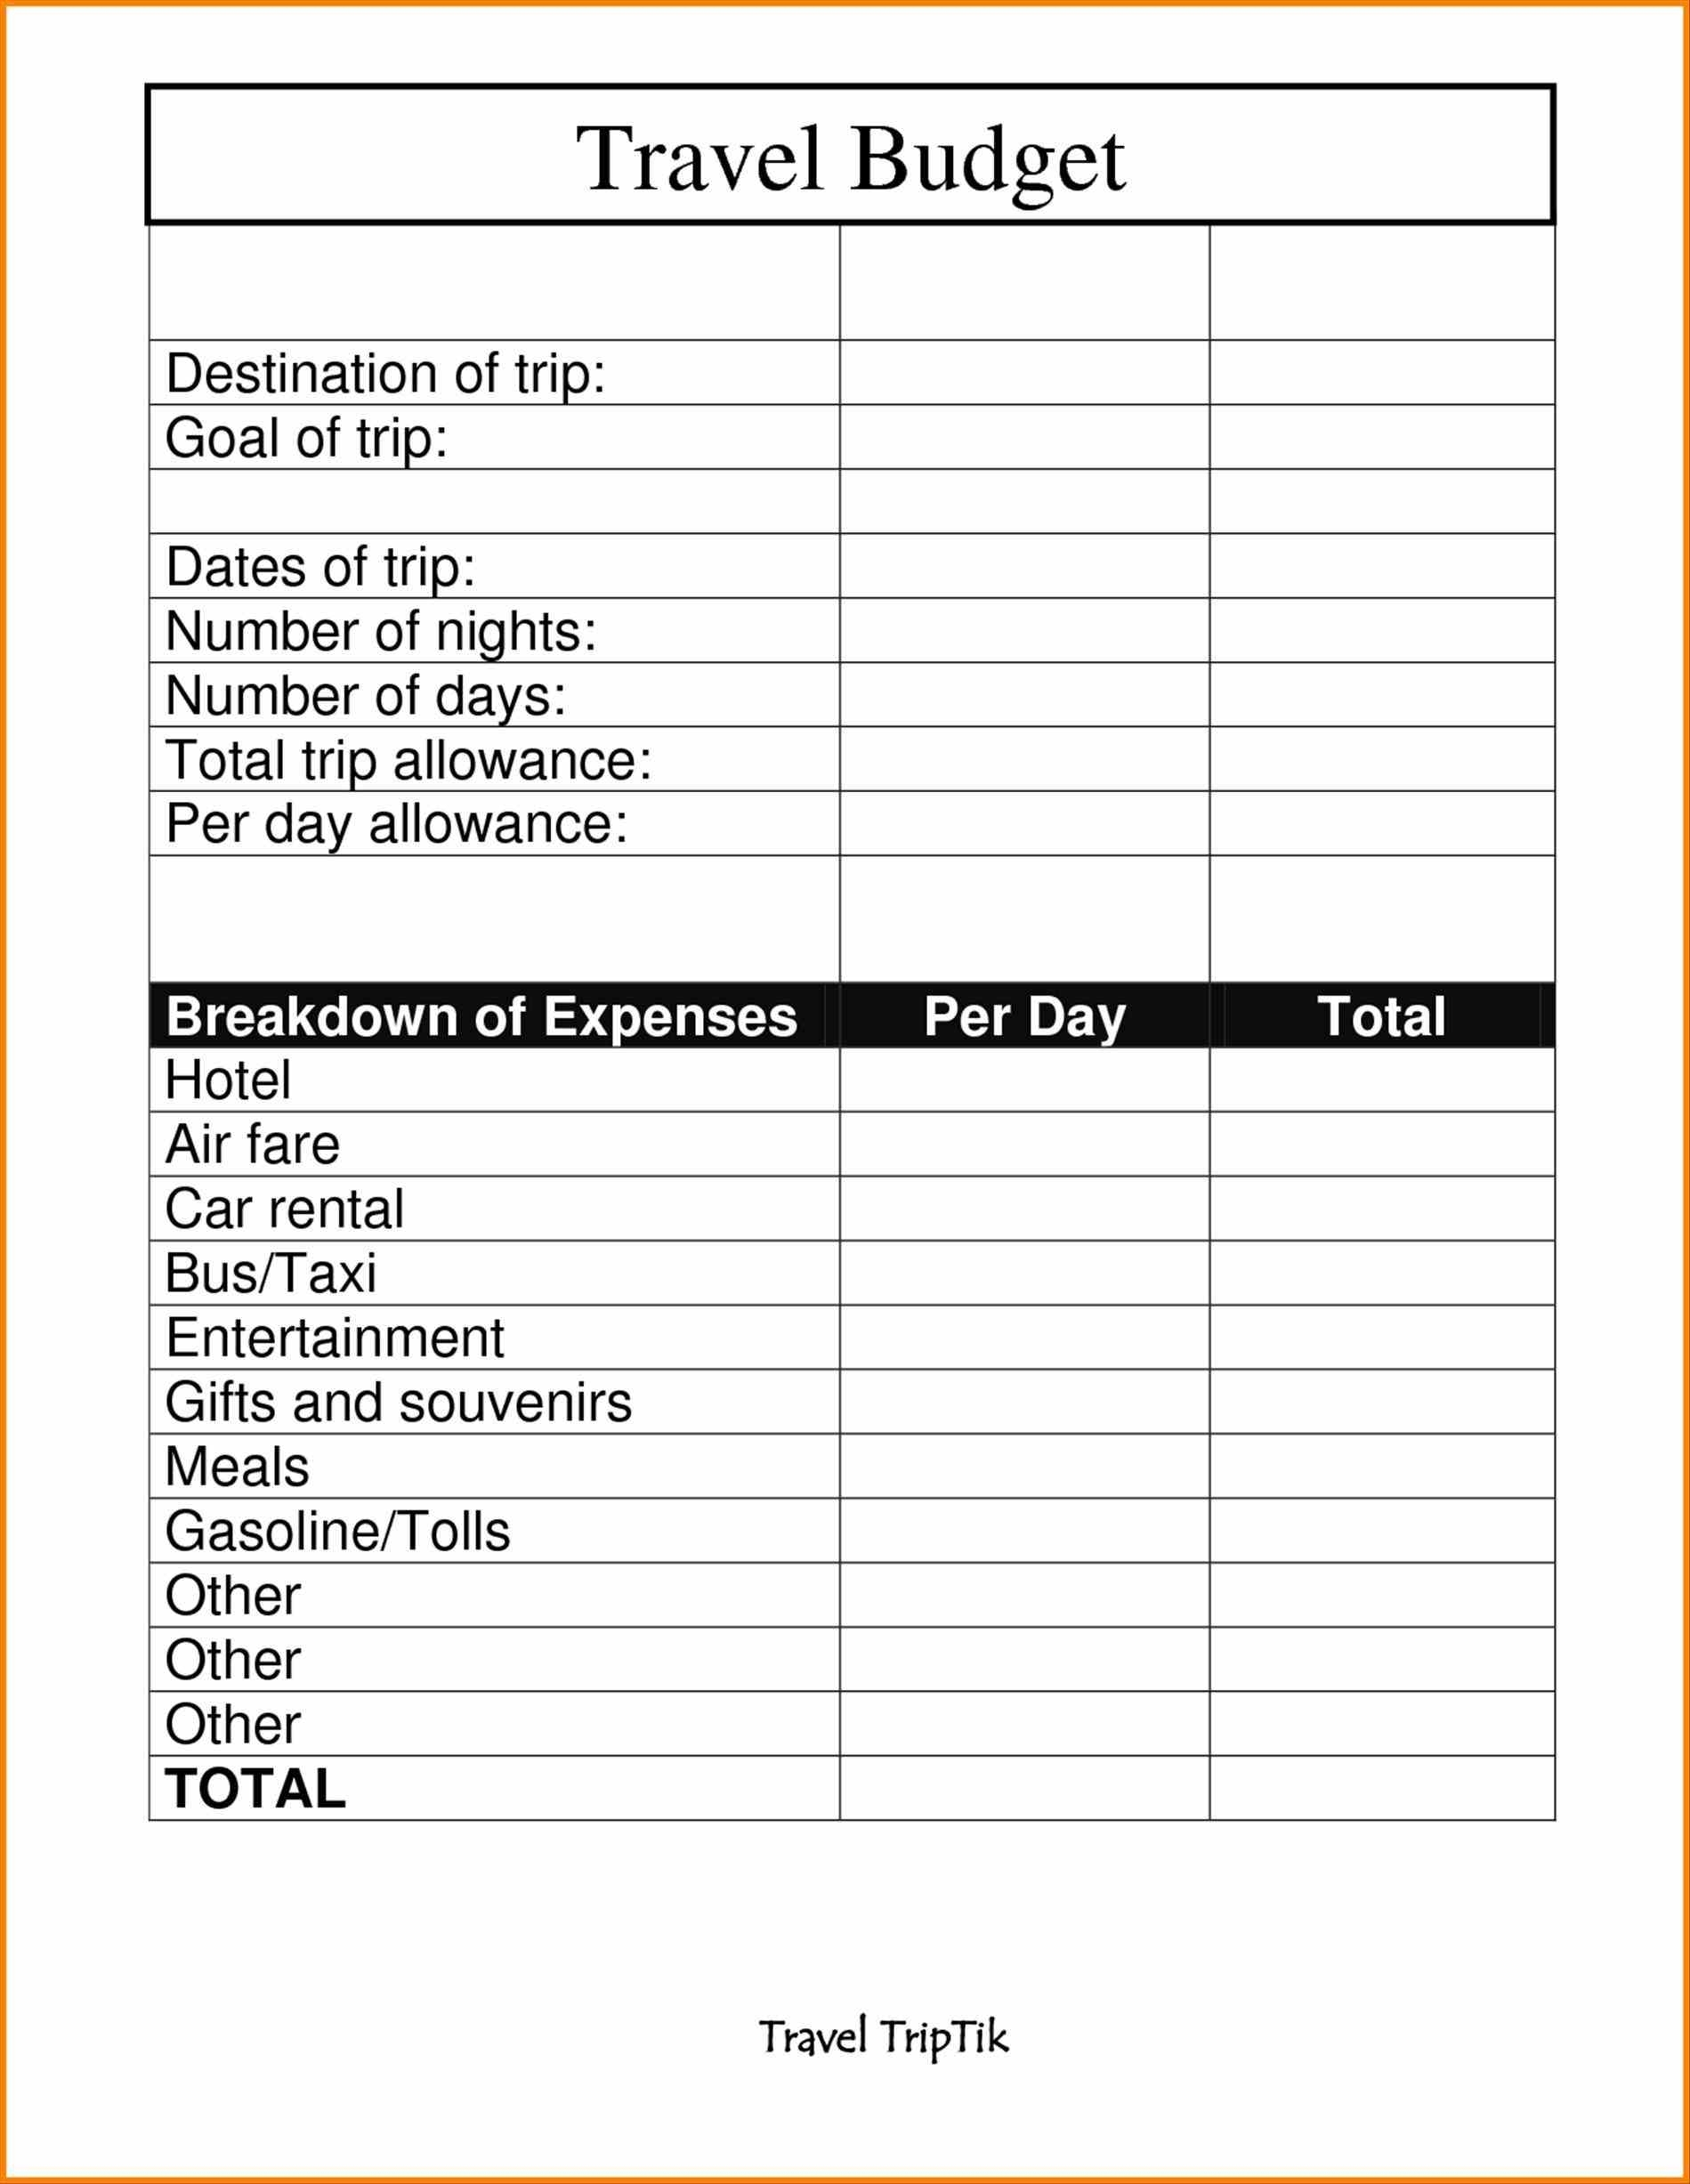 Images Of Business Travel Expense Form Budget Plan Youtube Travel to Business Travel Expense Policy Templates